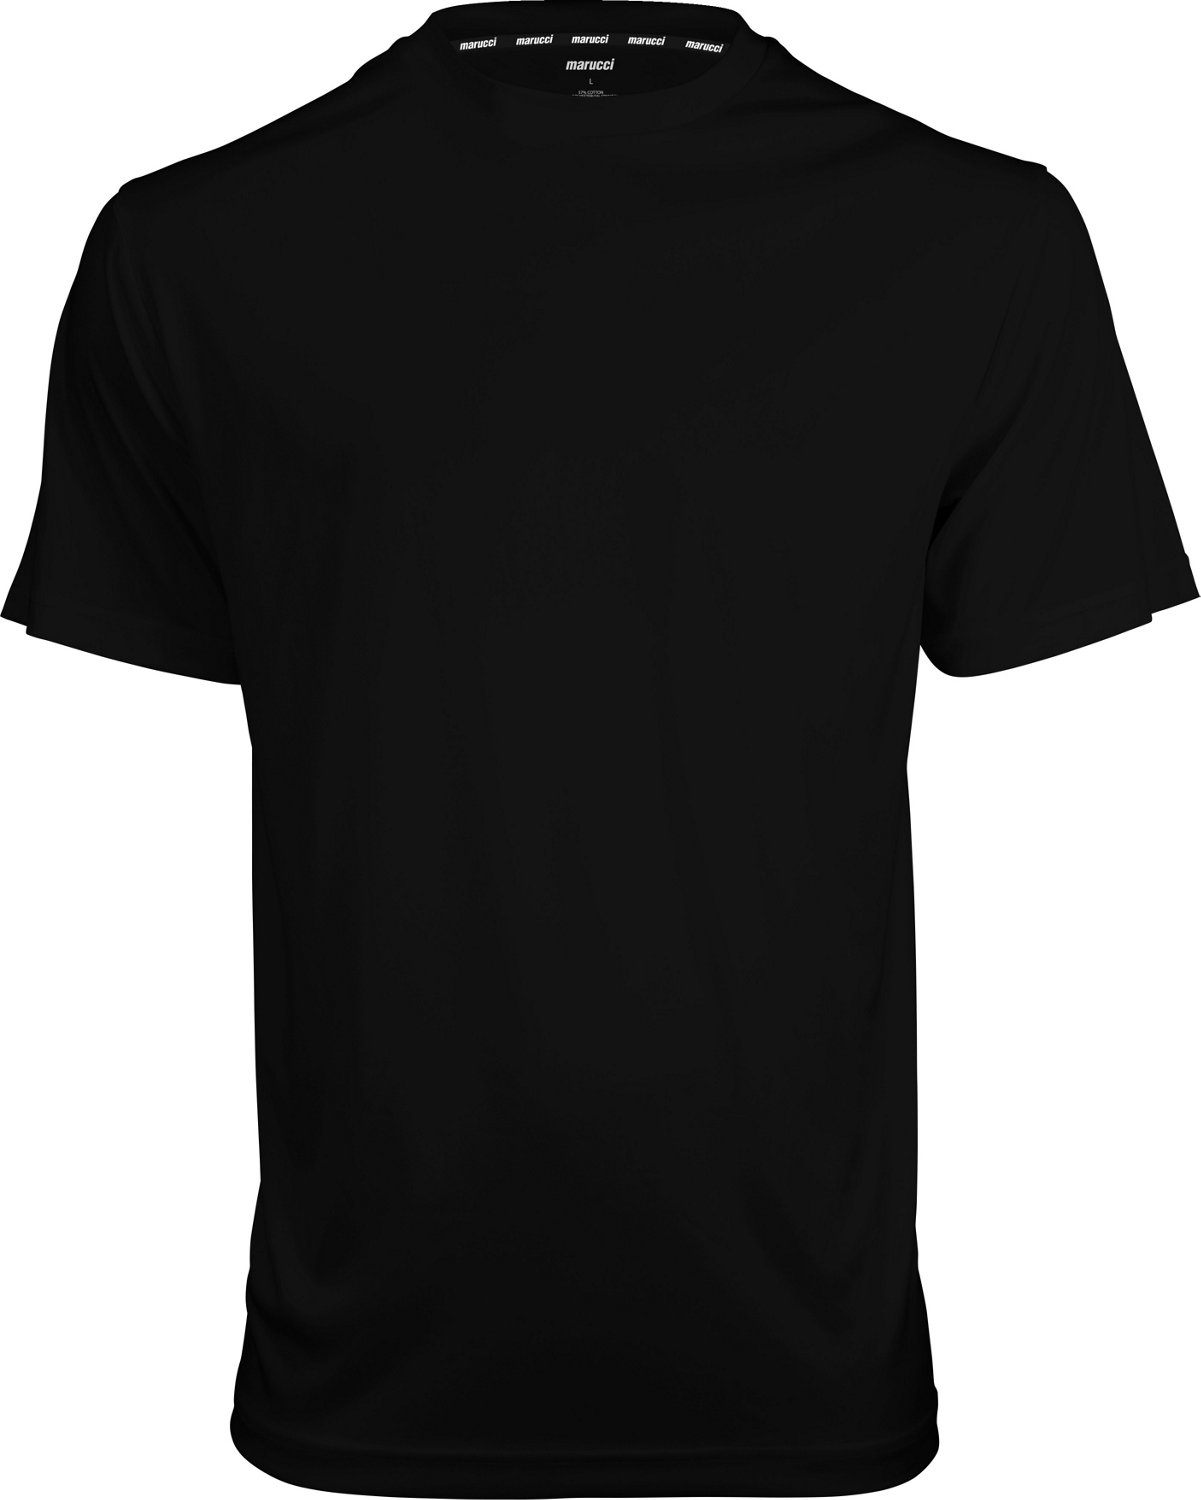 Marucci Youth Performance T-shirt | Free Shipping at Academy